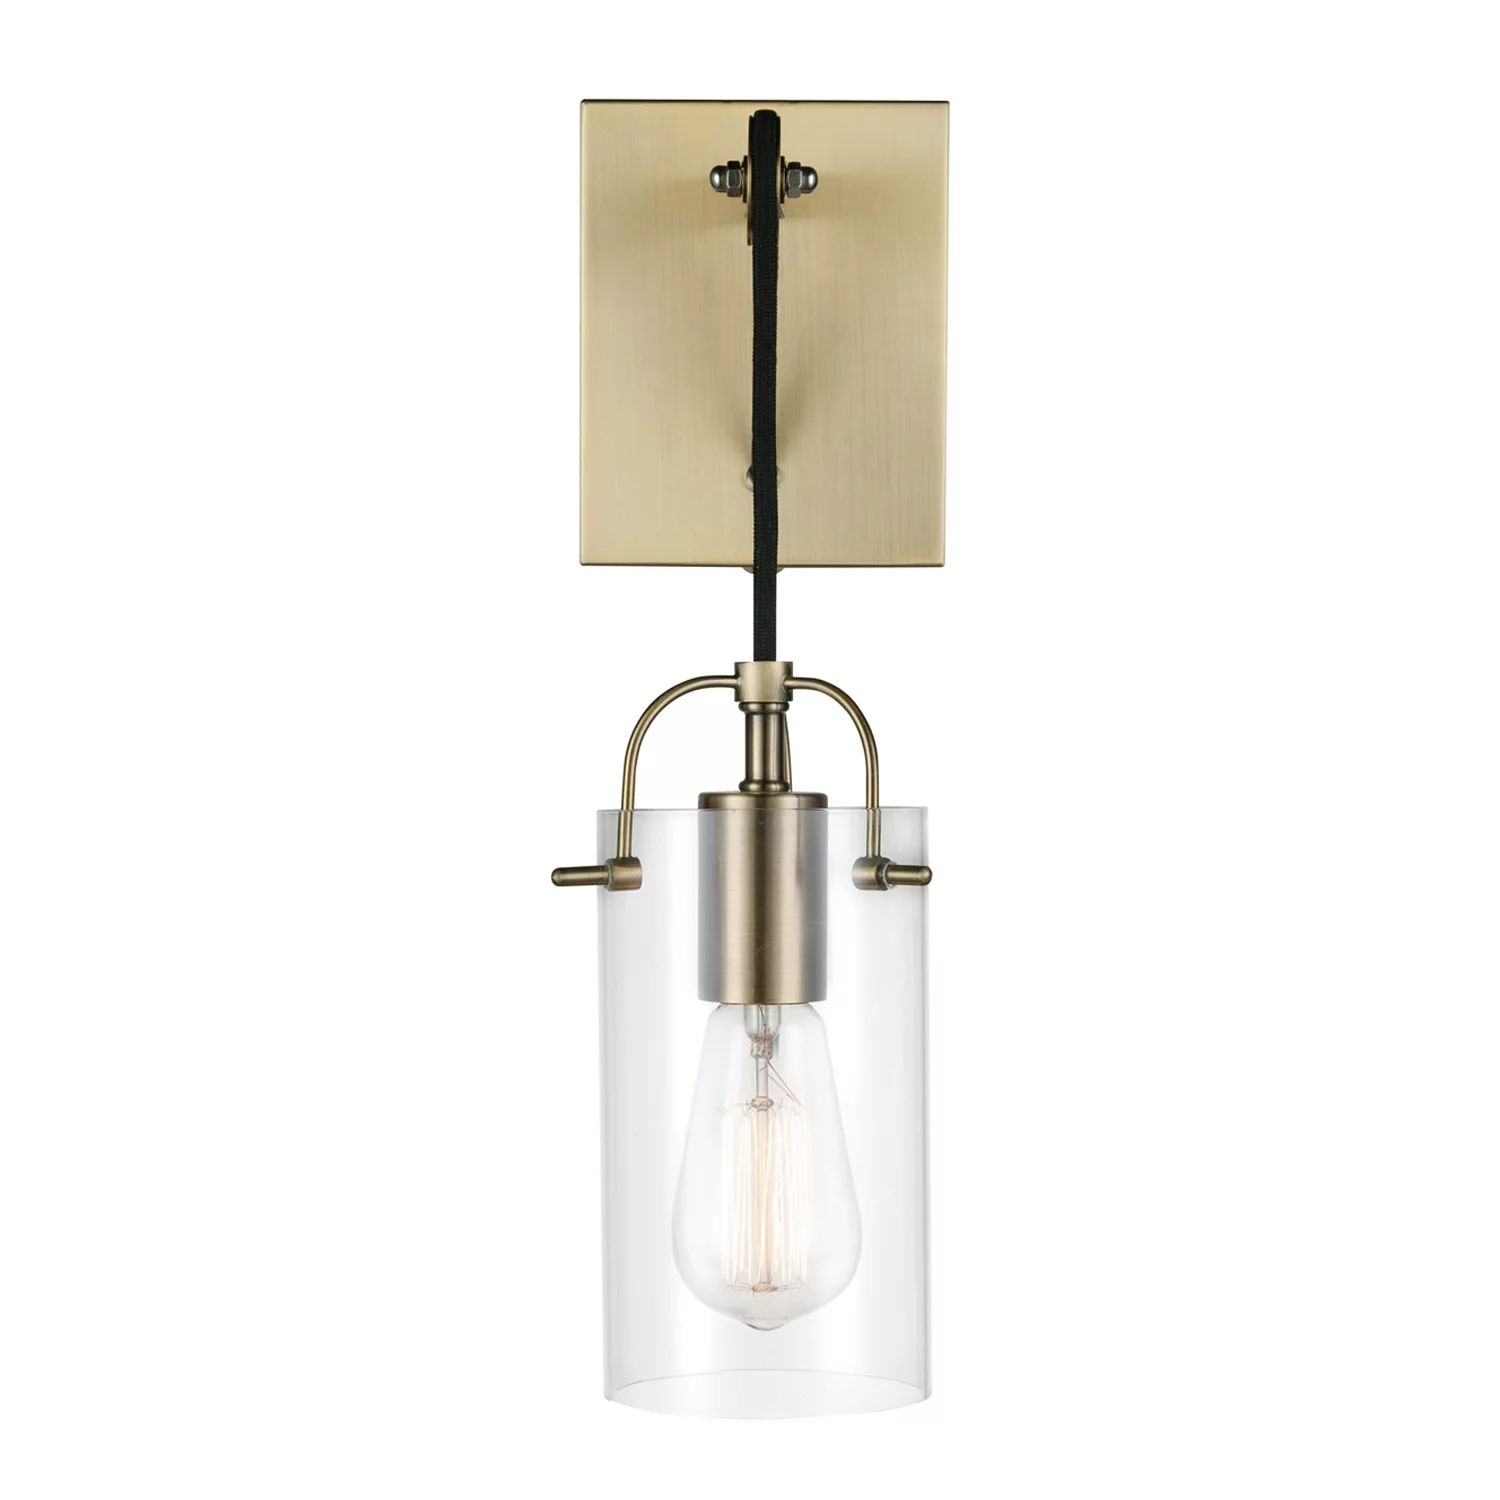 Globe Electric Nordhaven 1-Light Antique Brass Plug-In or Hardwire Wall Sconce with Glass Shade, ... | Walmart (US)